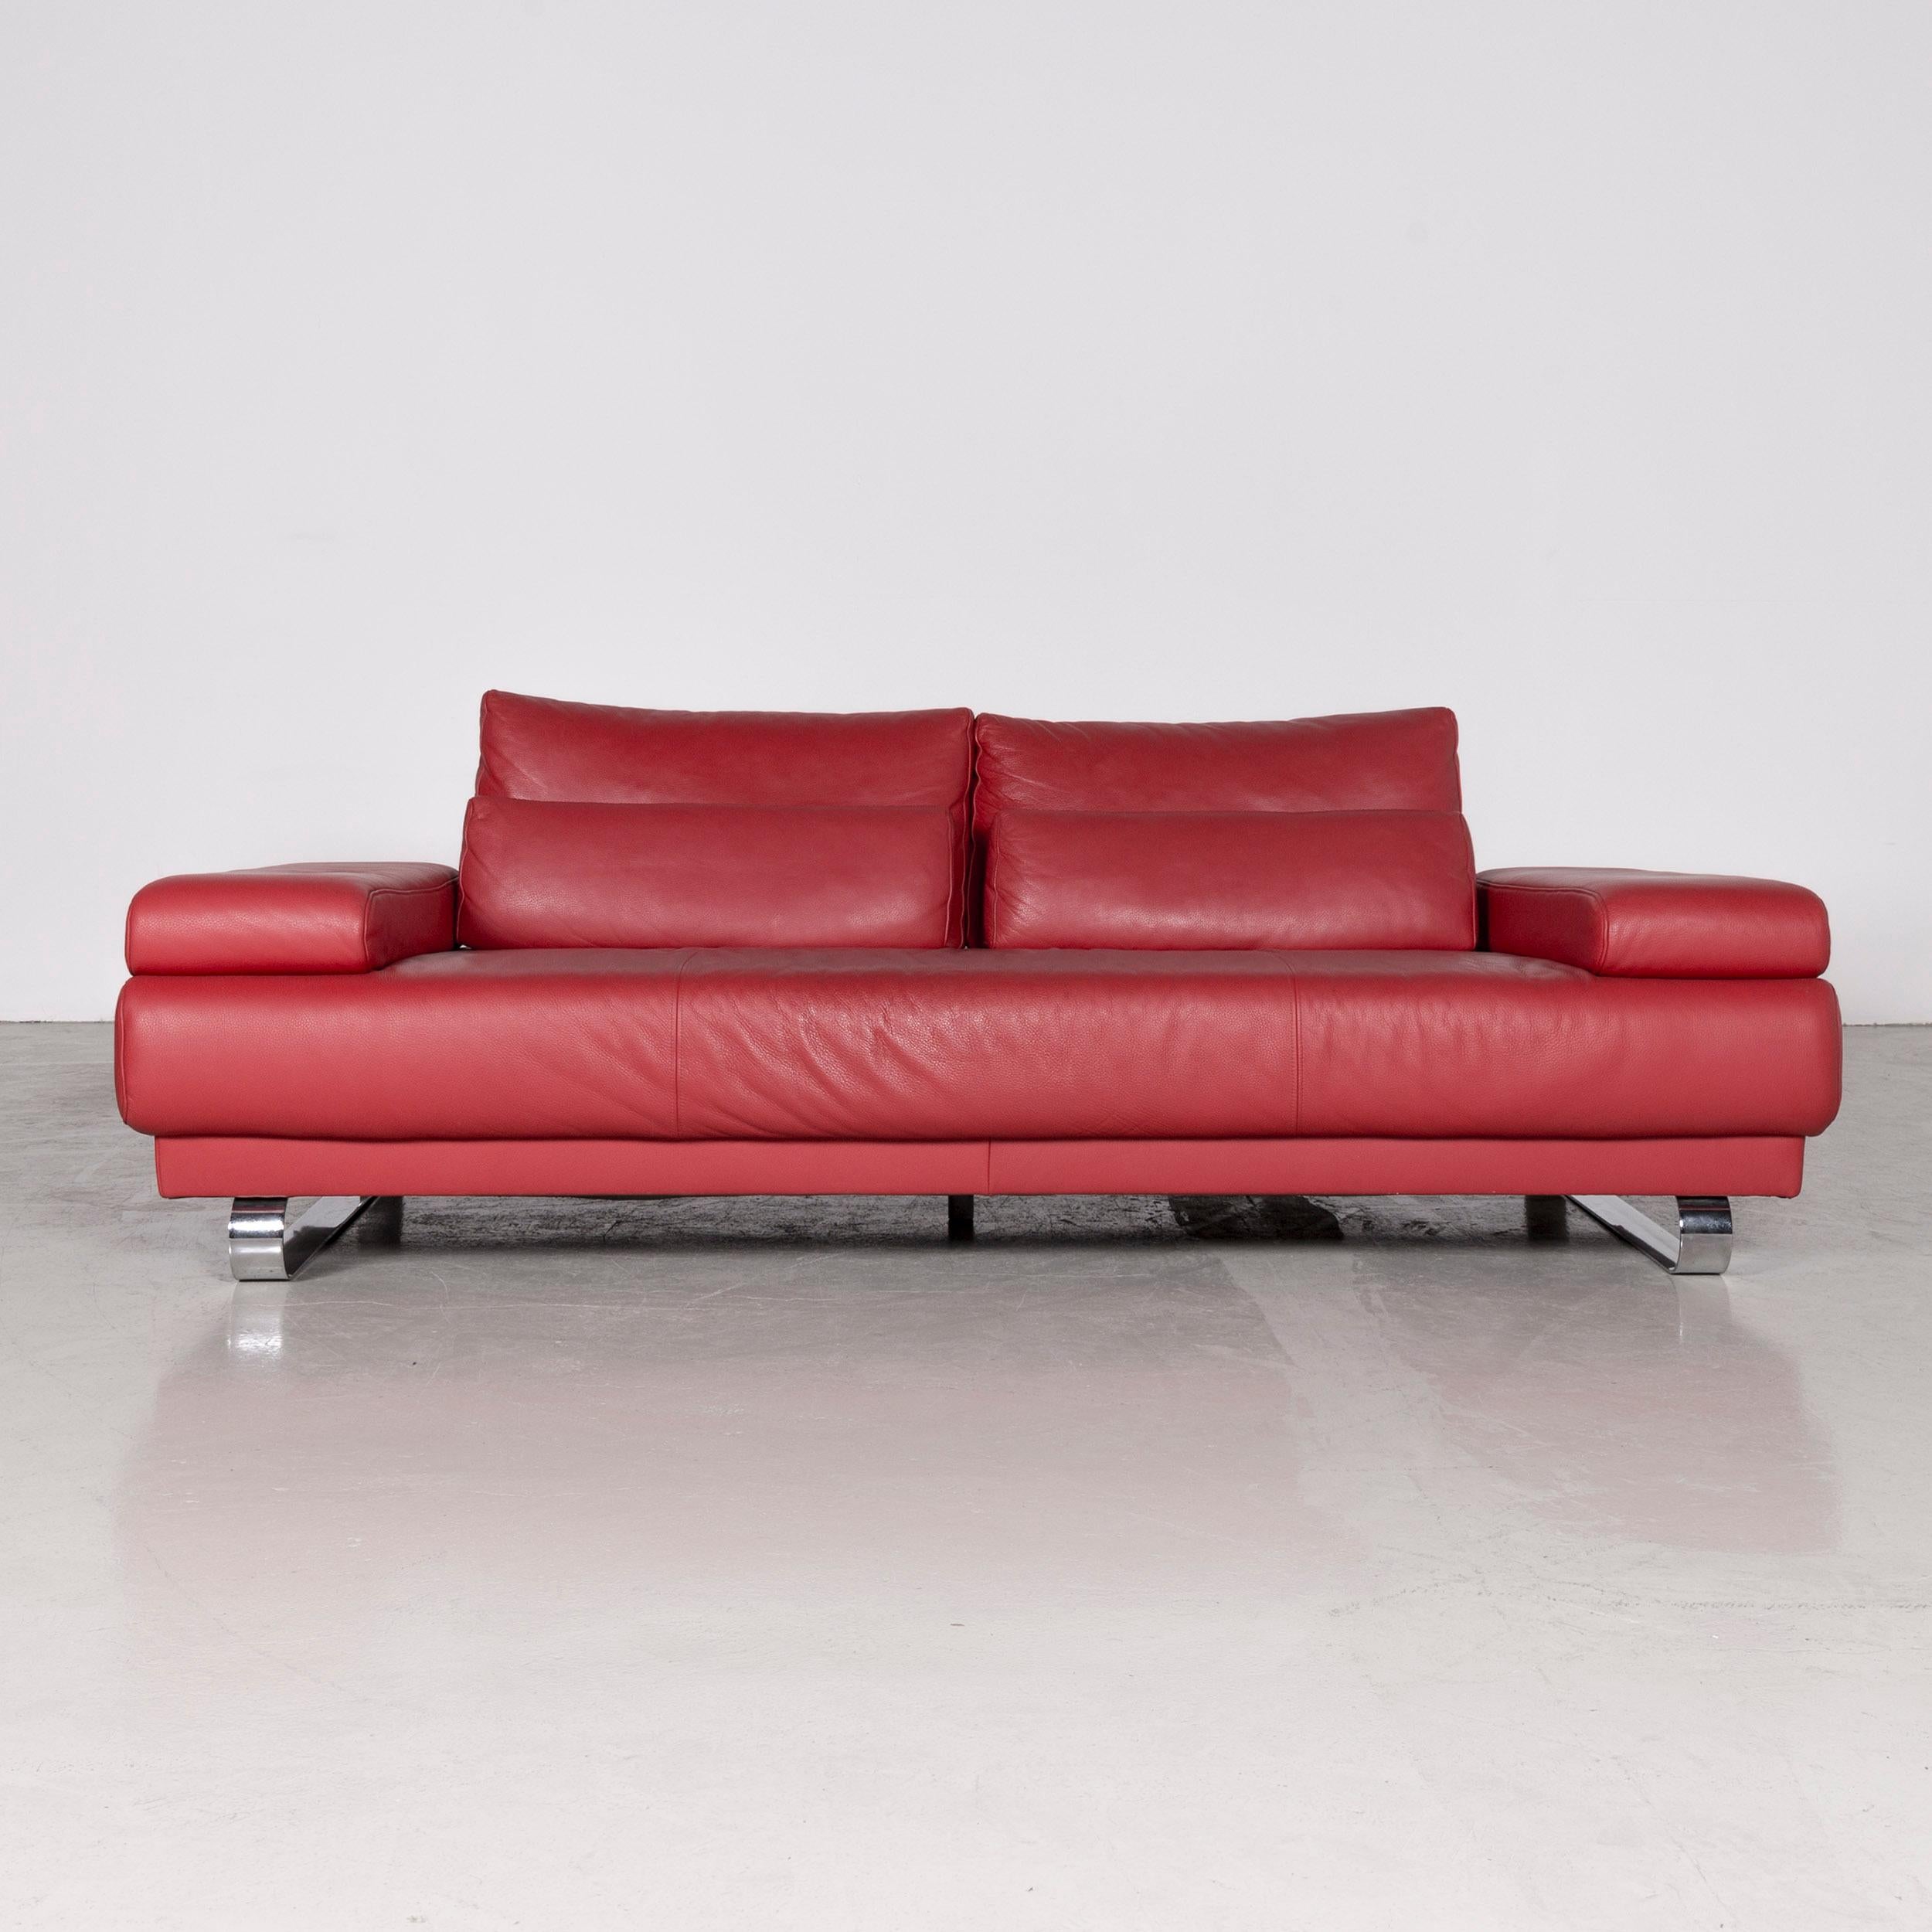 Ewald Schillig Harry Designer Sofa Leather Red Three-Seat Couch In Good Condition For Sale In Cologne, DE